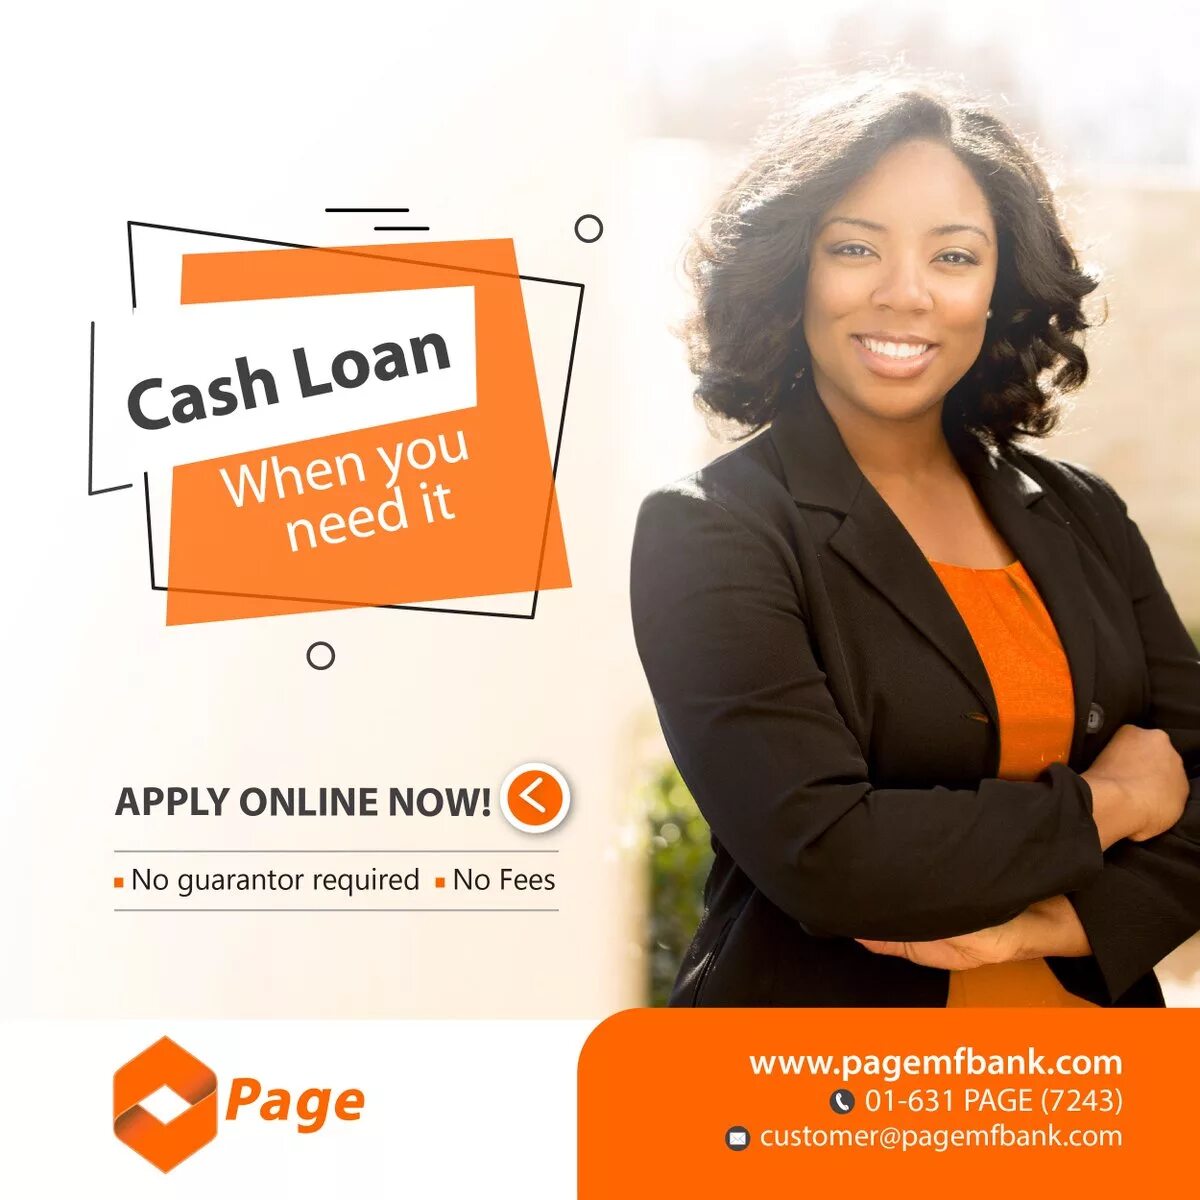 Apply up to. Need a quick loan. Cash to you. I need a quick loan.